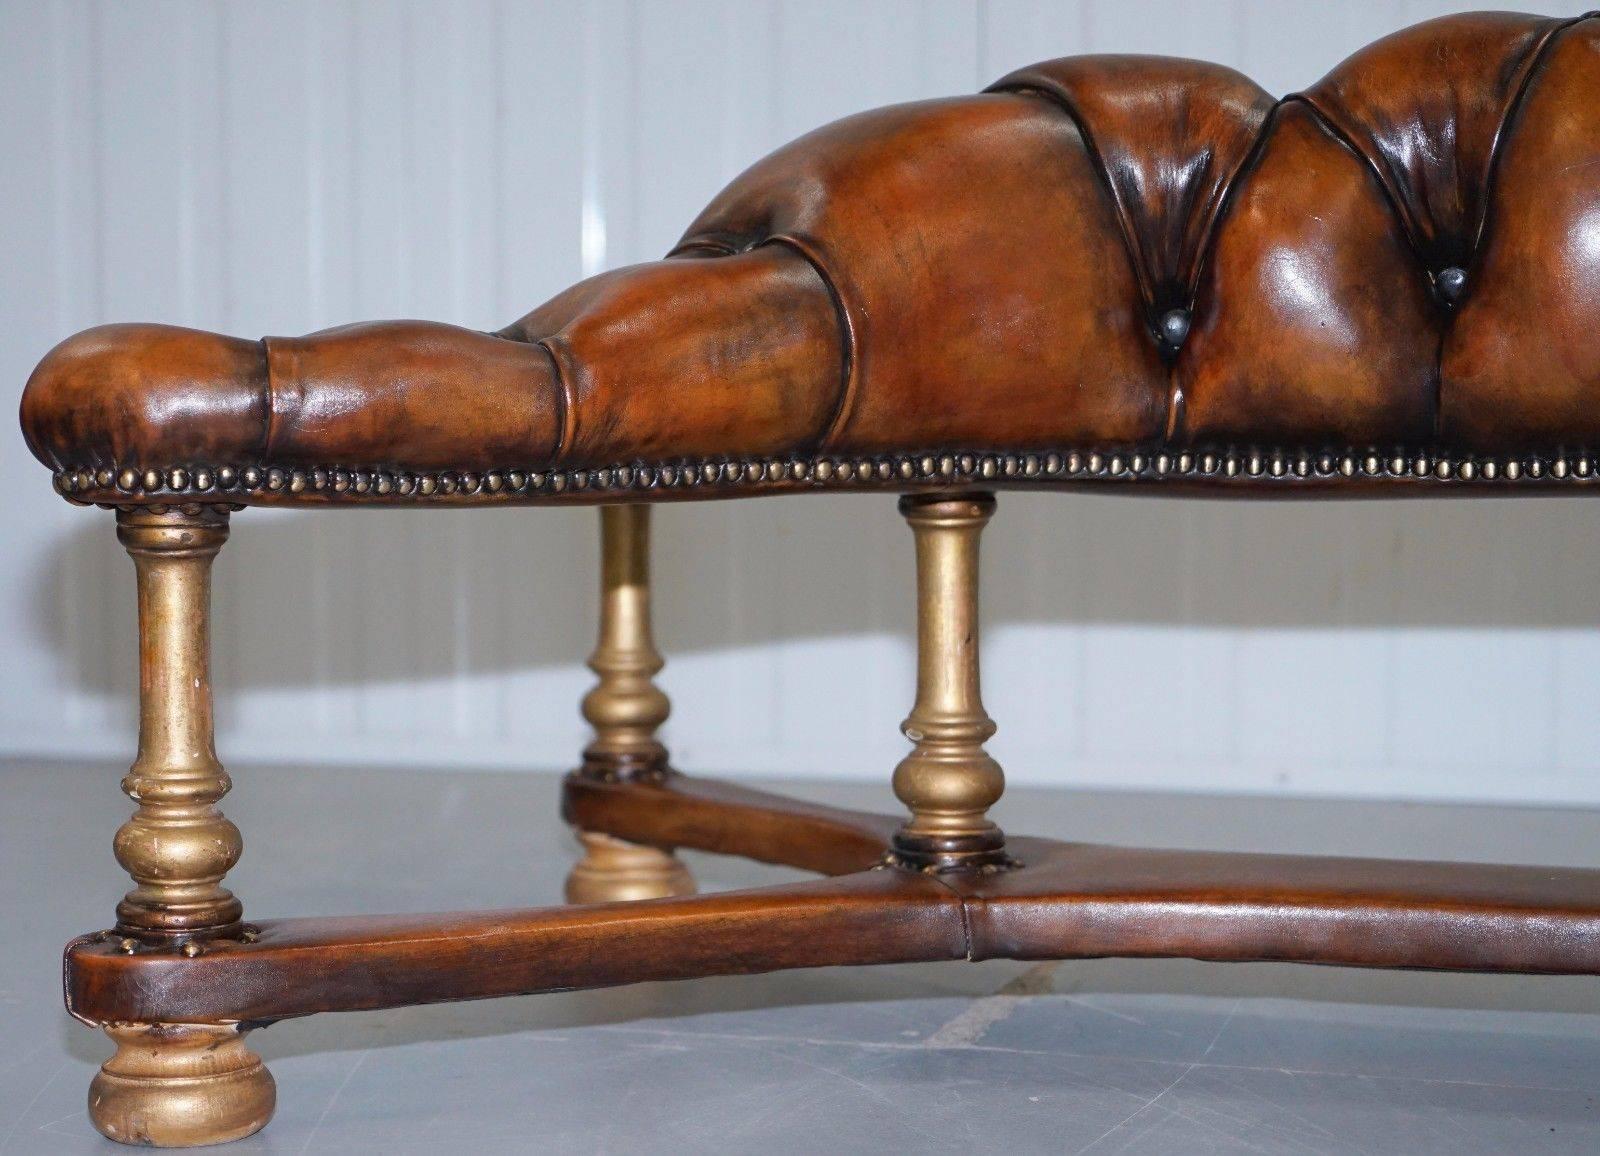 Wimbledon-Furniture is delighted to offer for sale this exceptionally rare original one of a kind early 18th-century French brothel bench which has been fully restored from top to bottom

There is around 50-100 high definition super-sized pictures